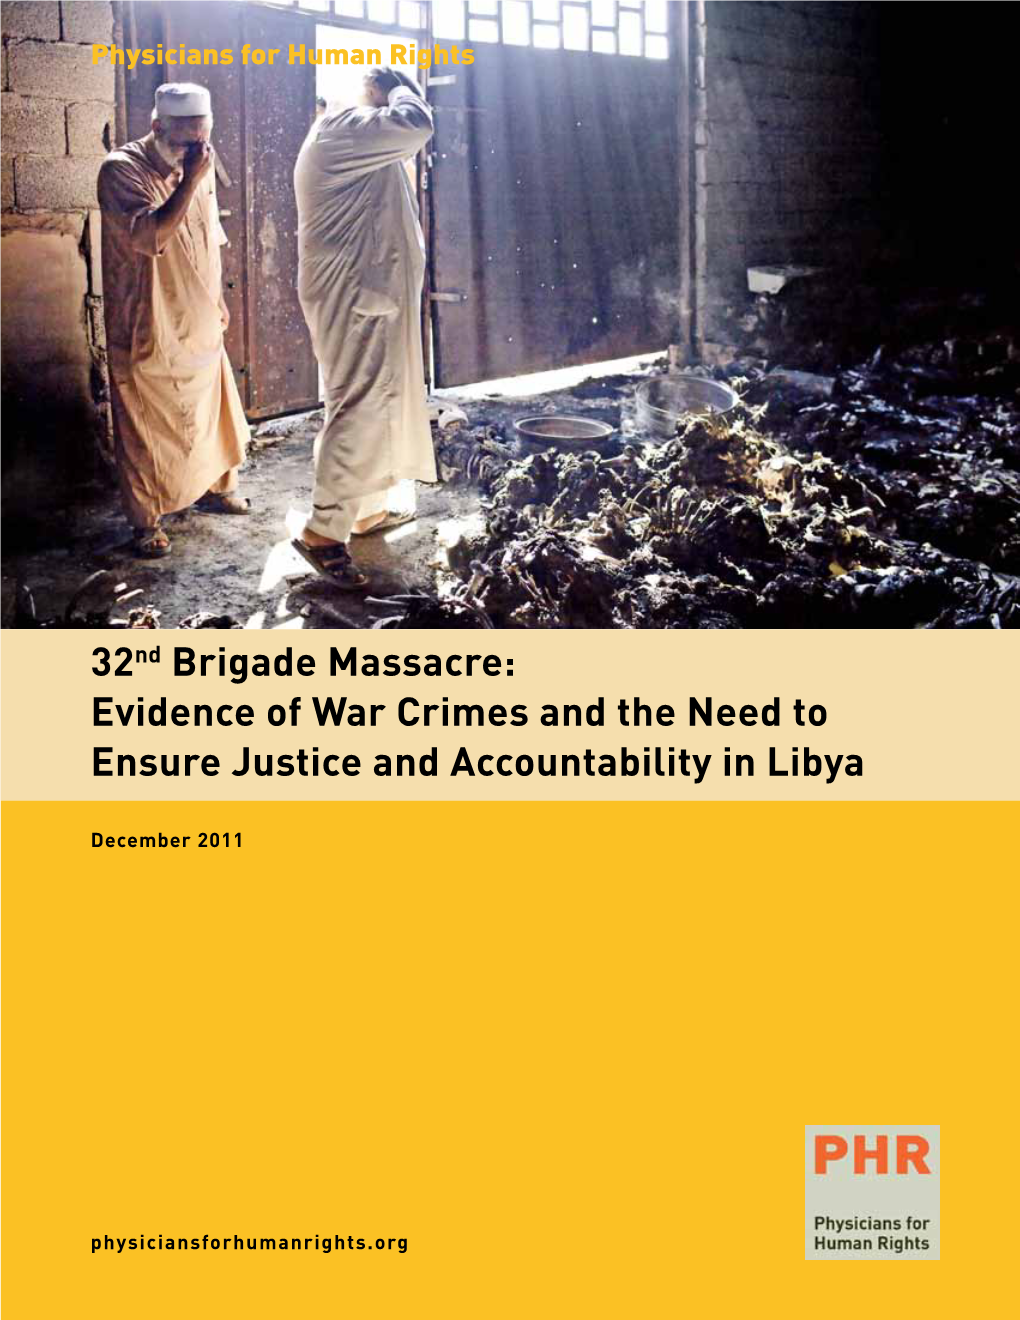 32Nd Brigade Massacre: Evidence of War Crimes and the Need to Ensure Justice and Accountability in Libya